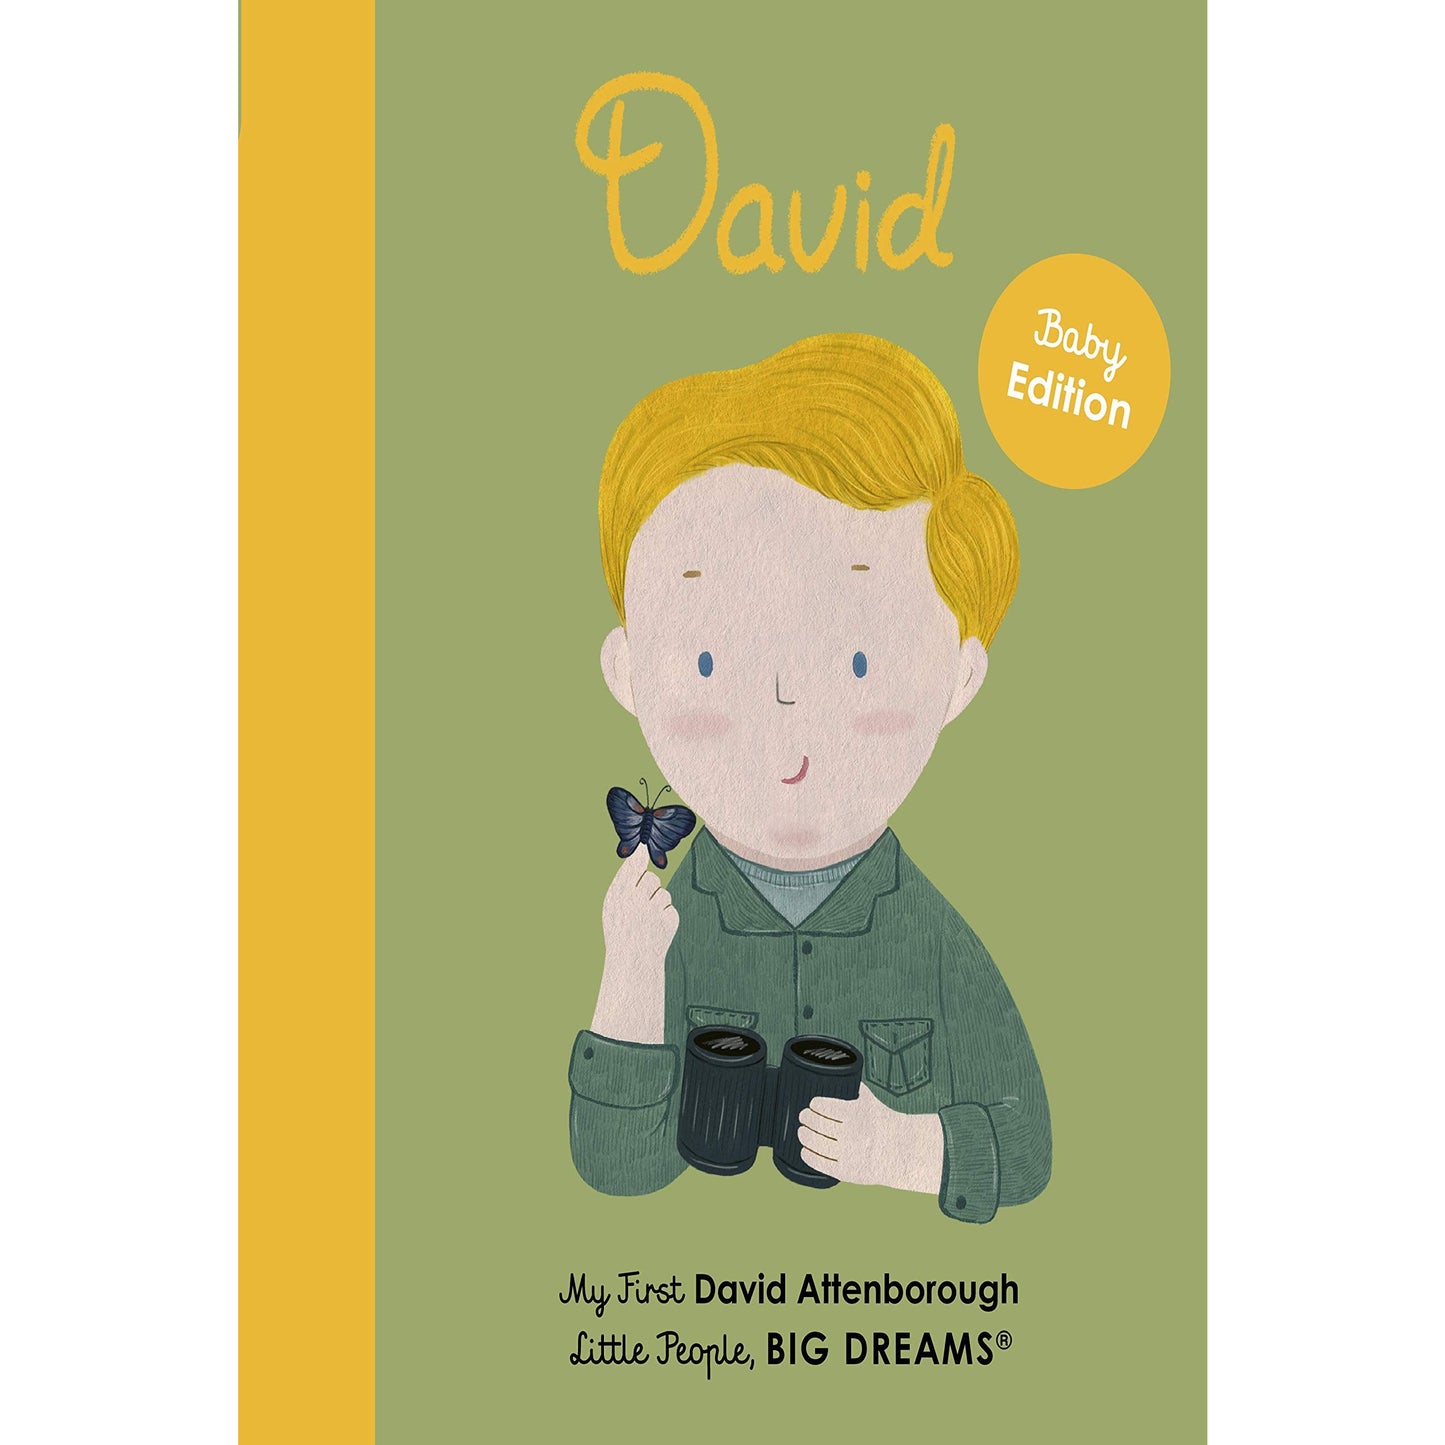 David Attenborough - My First Little People BIG DREAMS - Muddy Boots Home UK